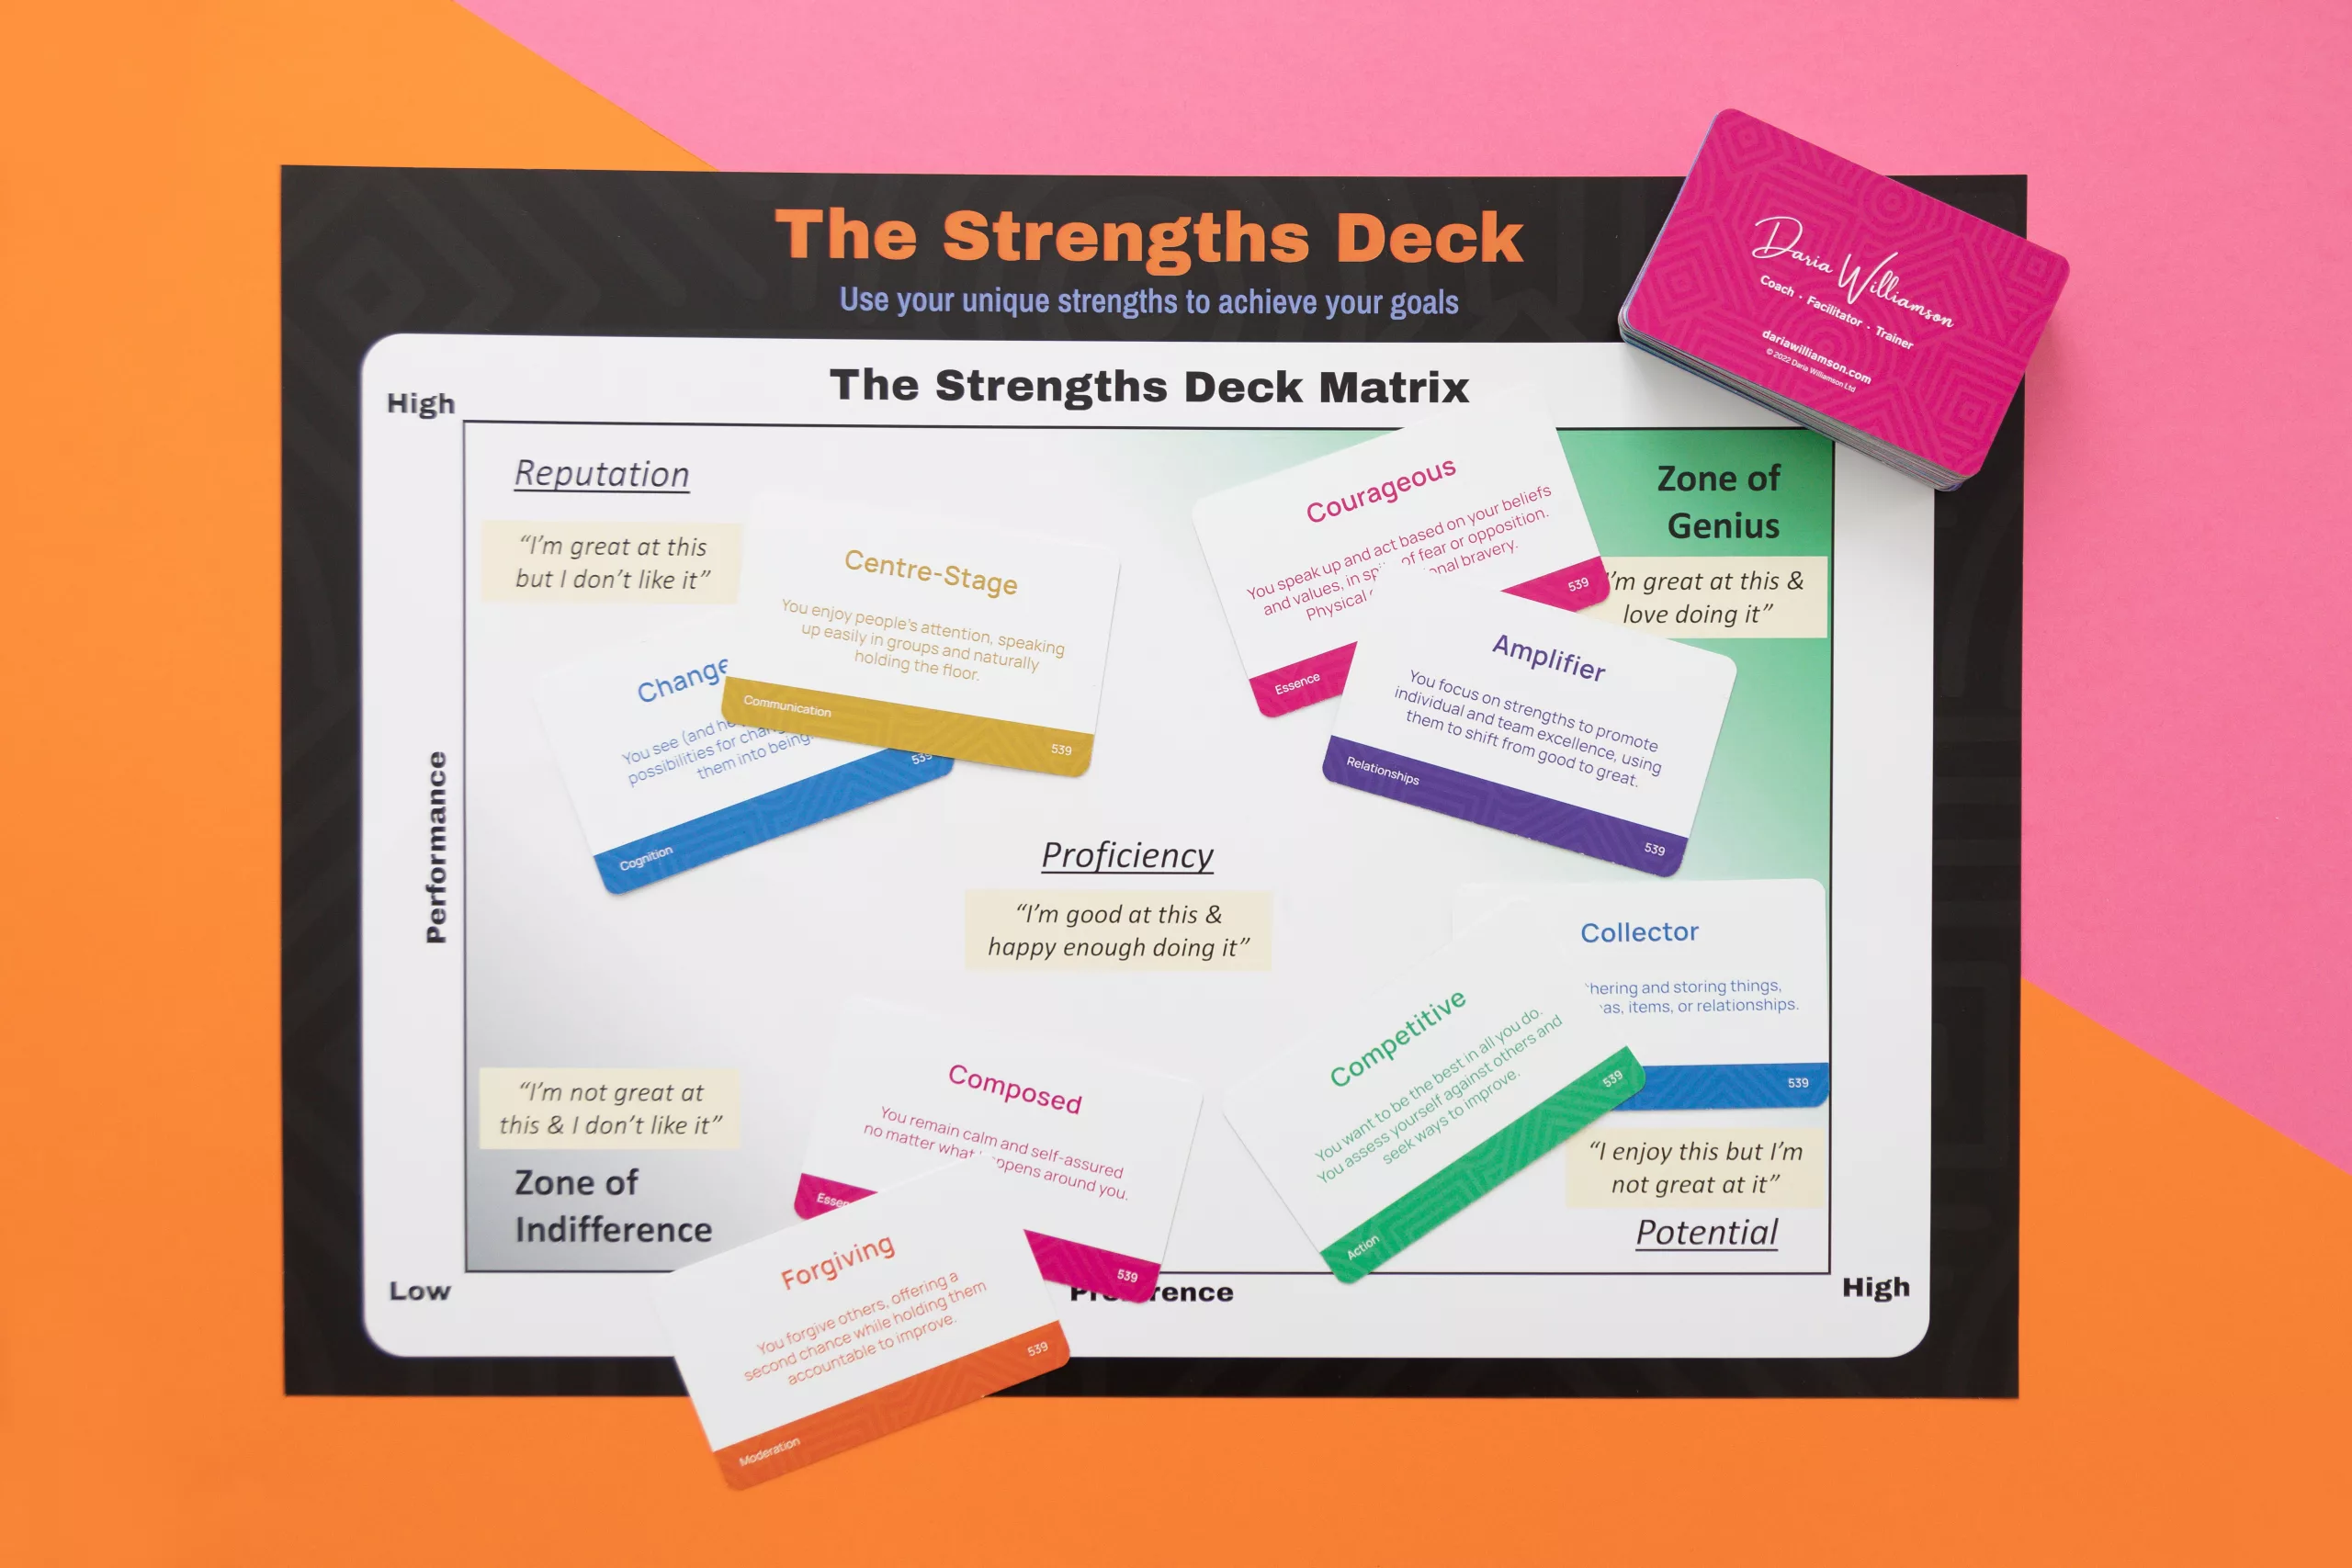 The Strengths Deck Matrix is overlaid on a pink and orange background. Scattered across the matrix are several cards from The Strengths Deck, showing the face of the card with the strength name and definition, with a brightly-coloured flash at the bottom of the card. In the top right of the matrix are the remaining cards on the deck, stacked face-down. The back of the card is brightly-coloured, showing the Daria Williamson logo.